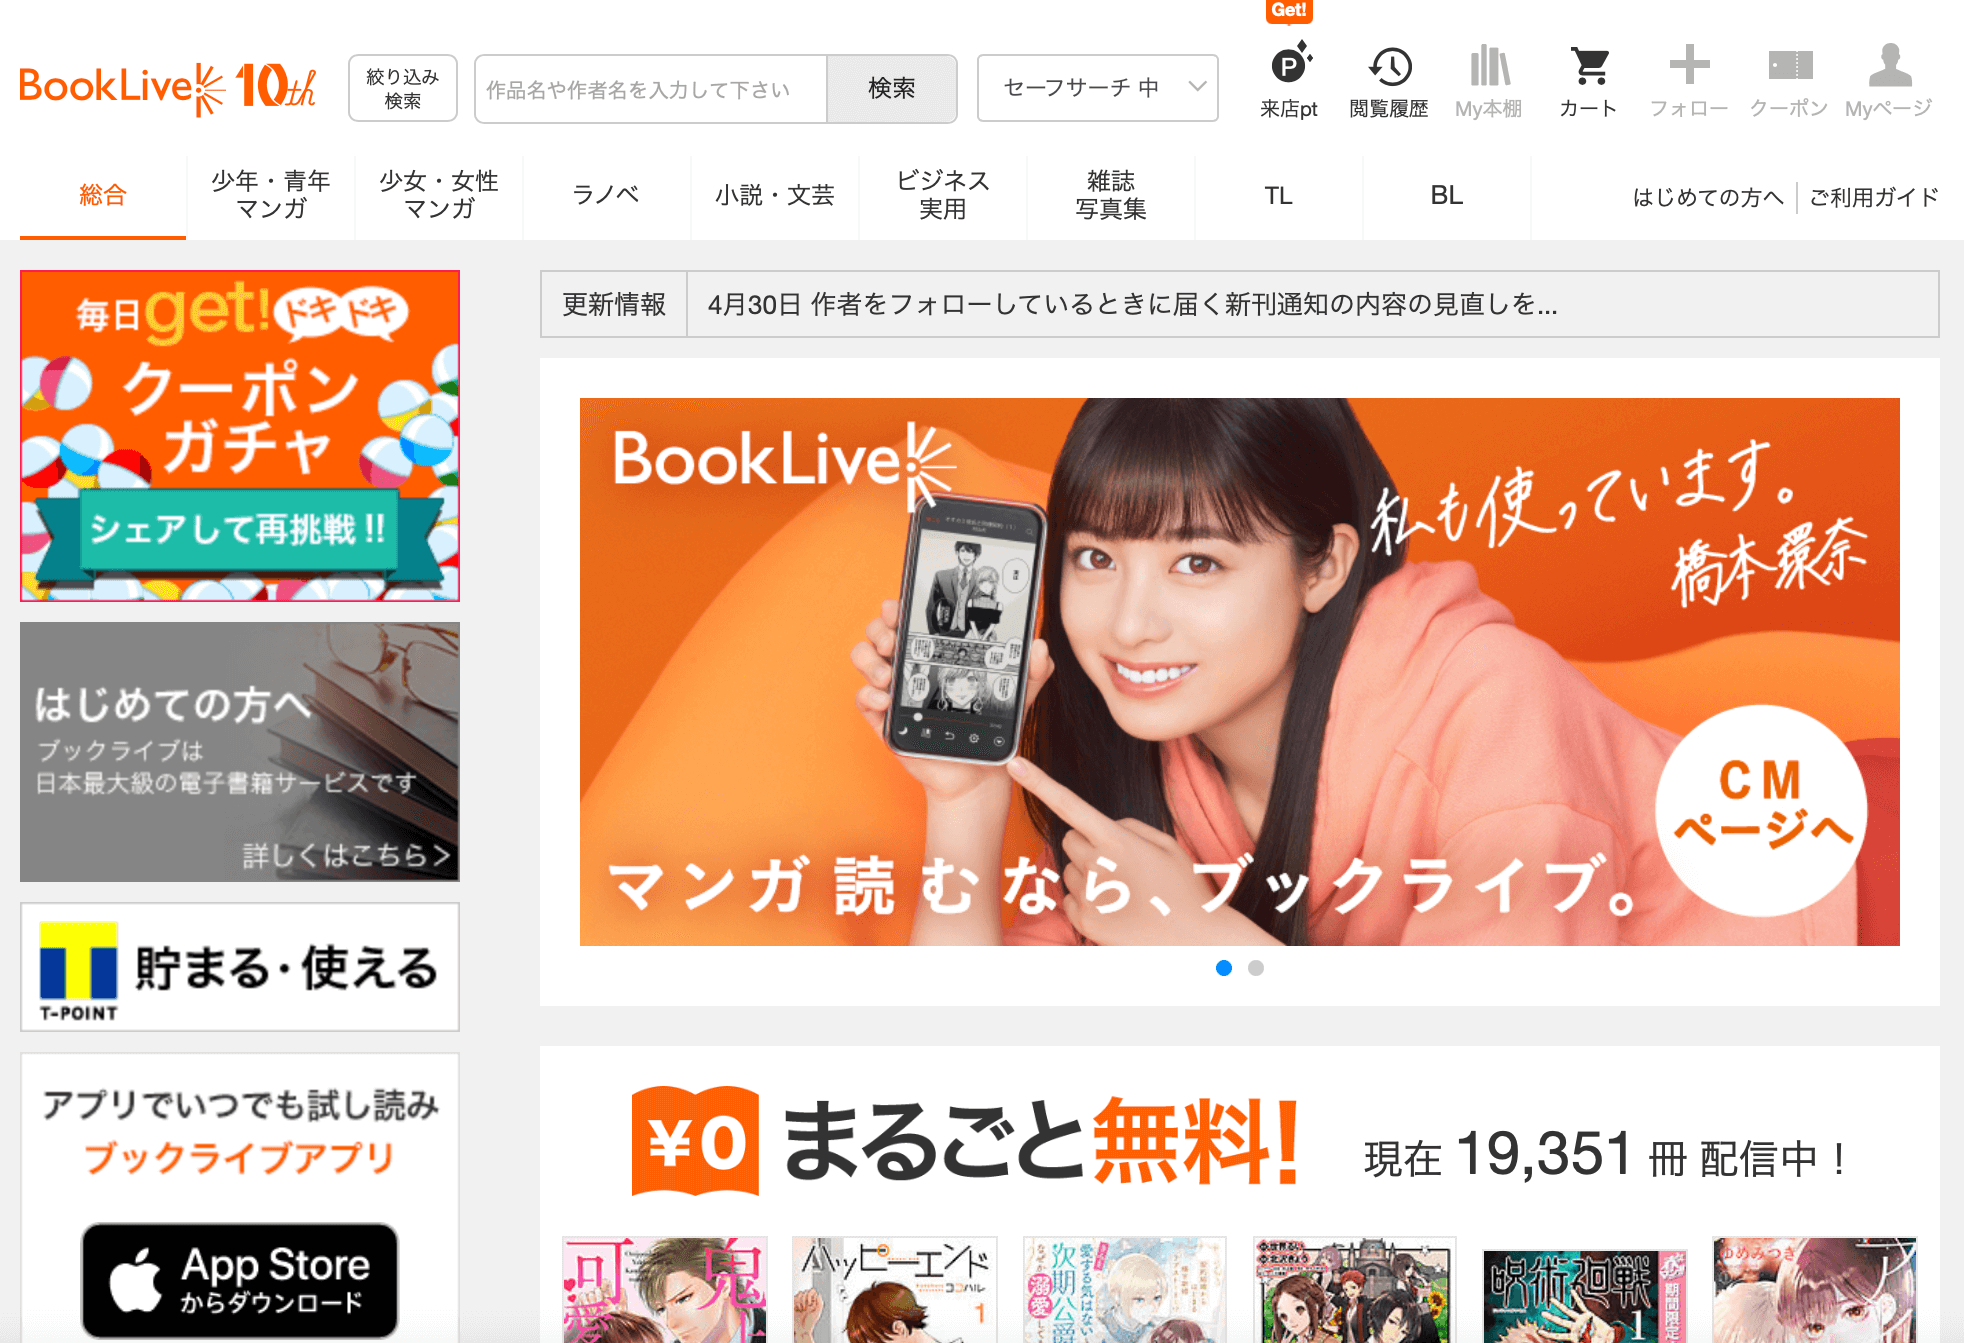 BookLive